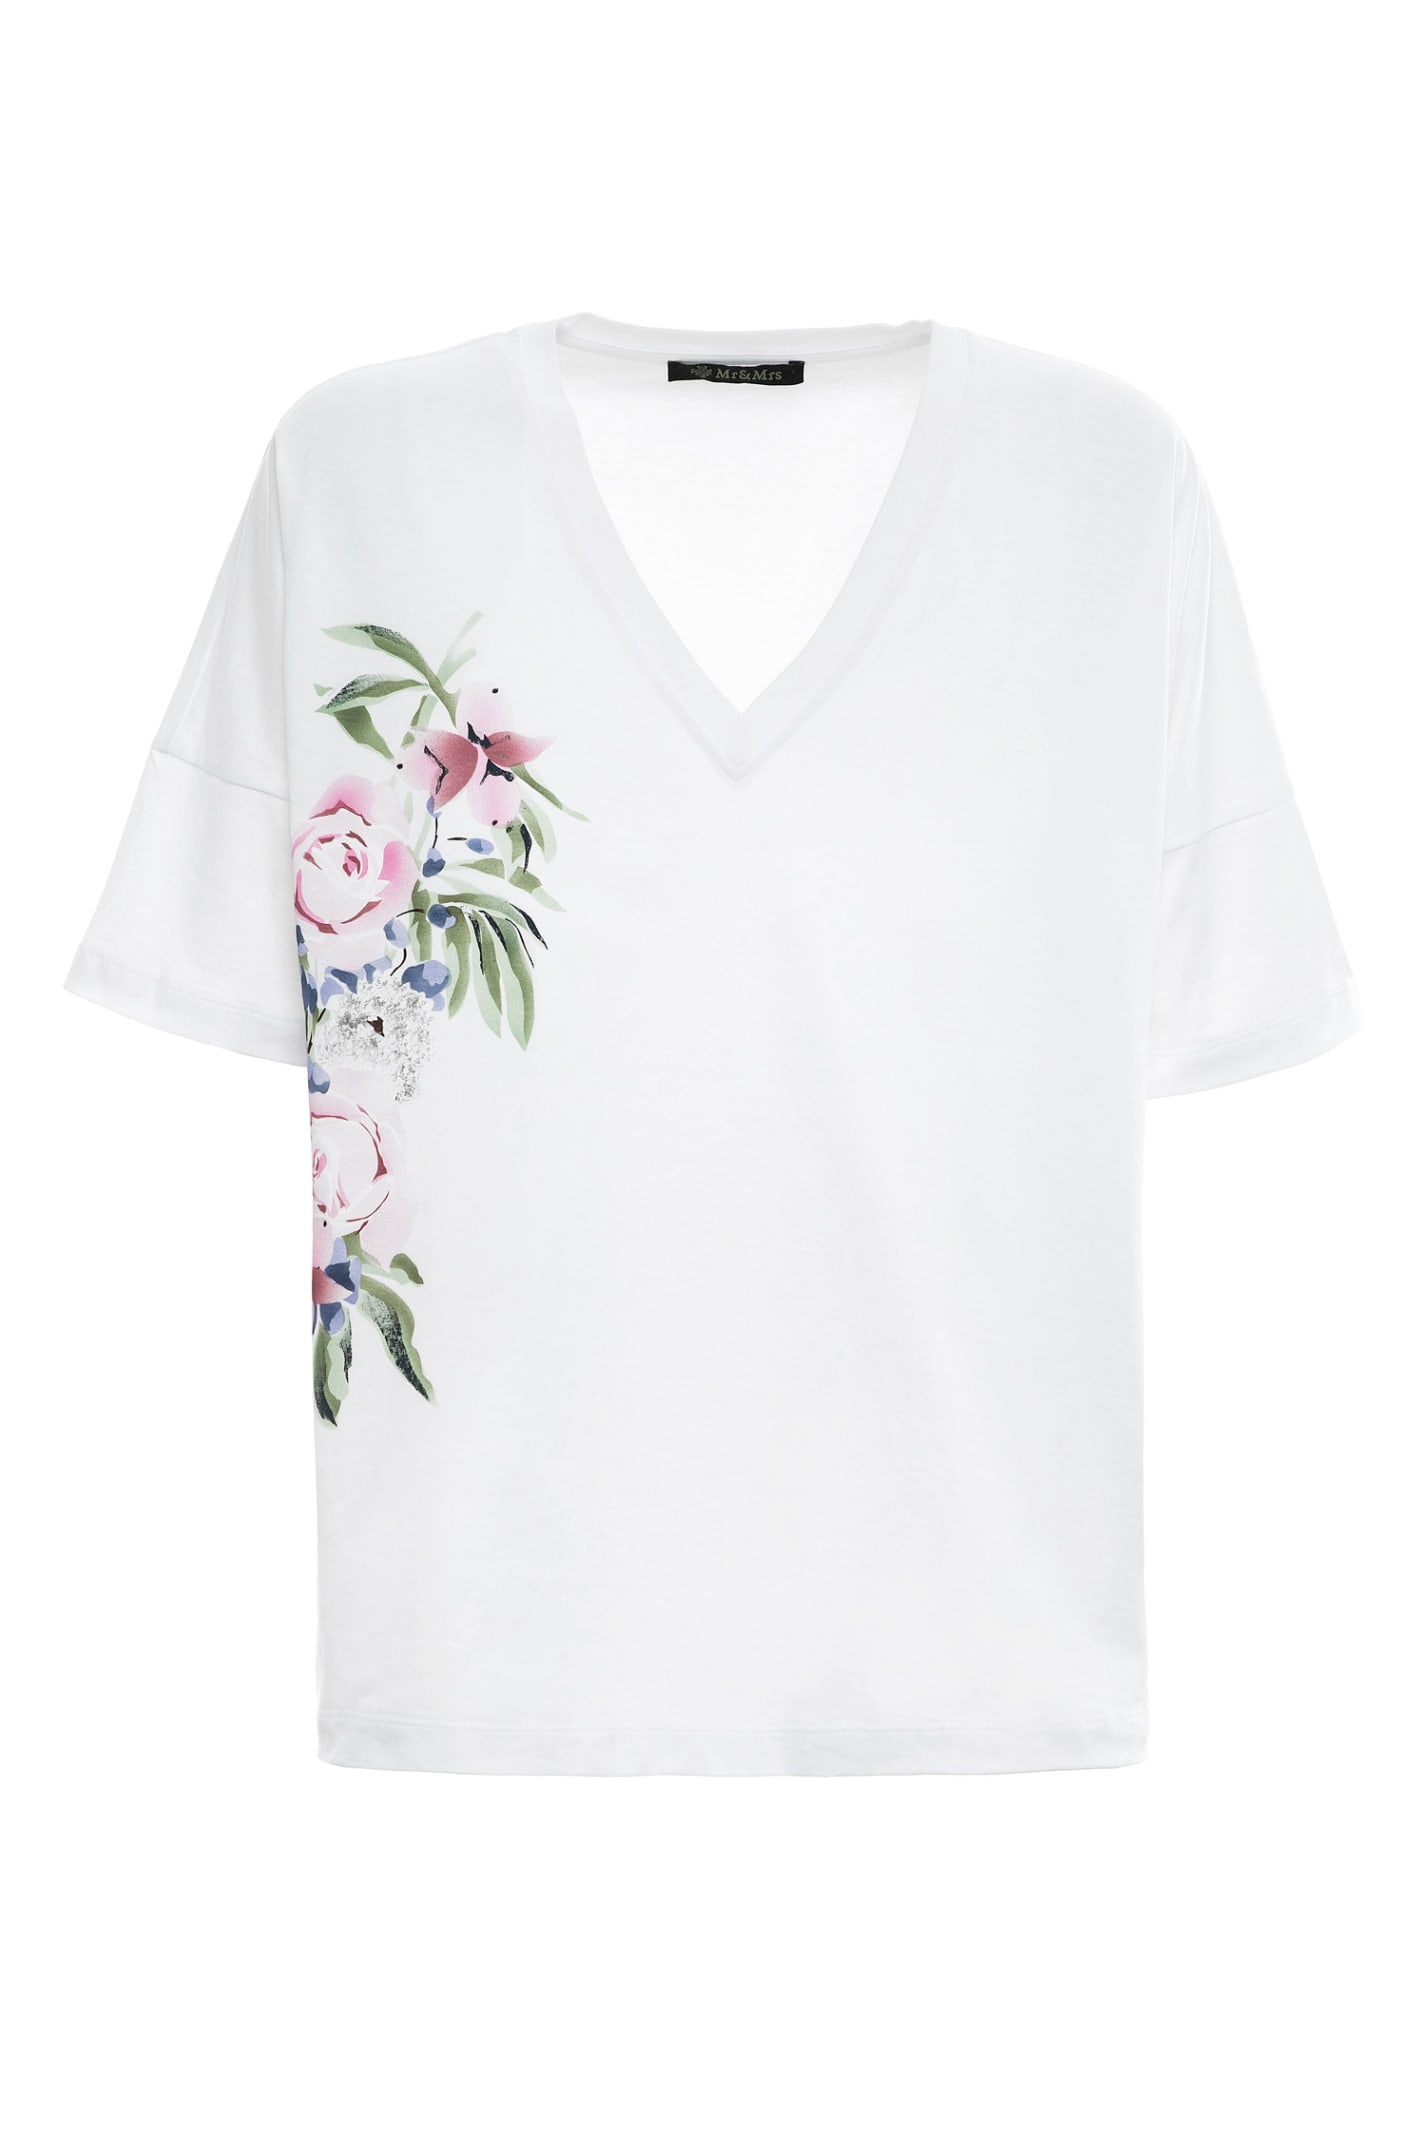 Mr & Mrs Italy Floral Prints T-shirt For Woman